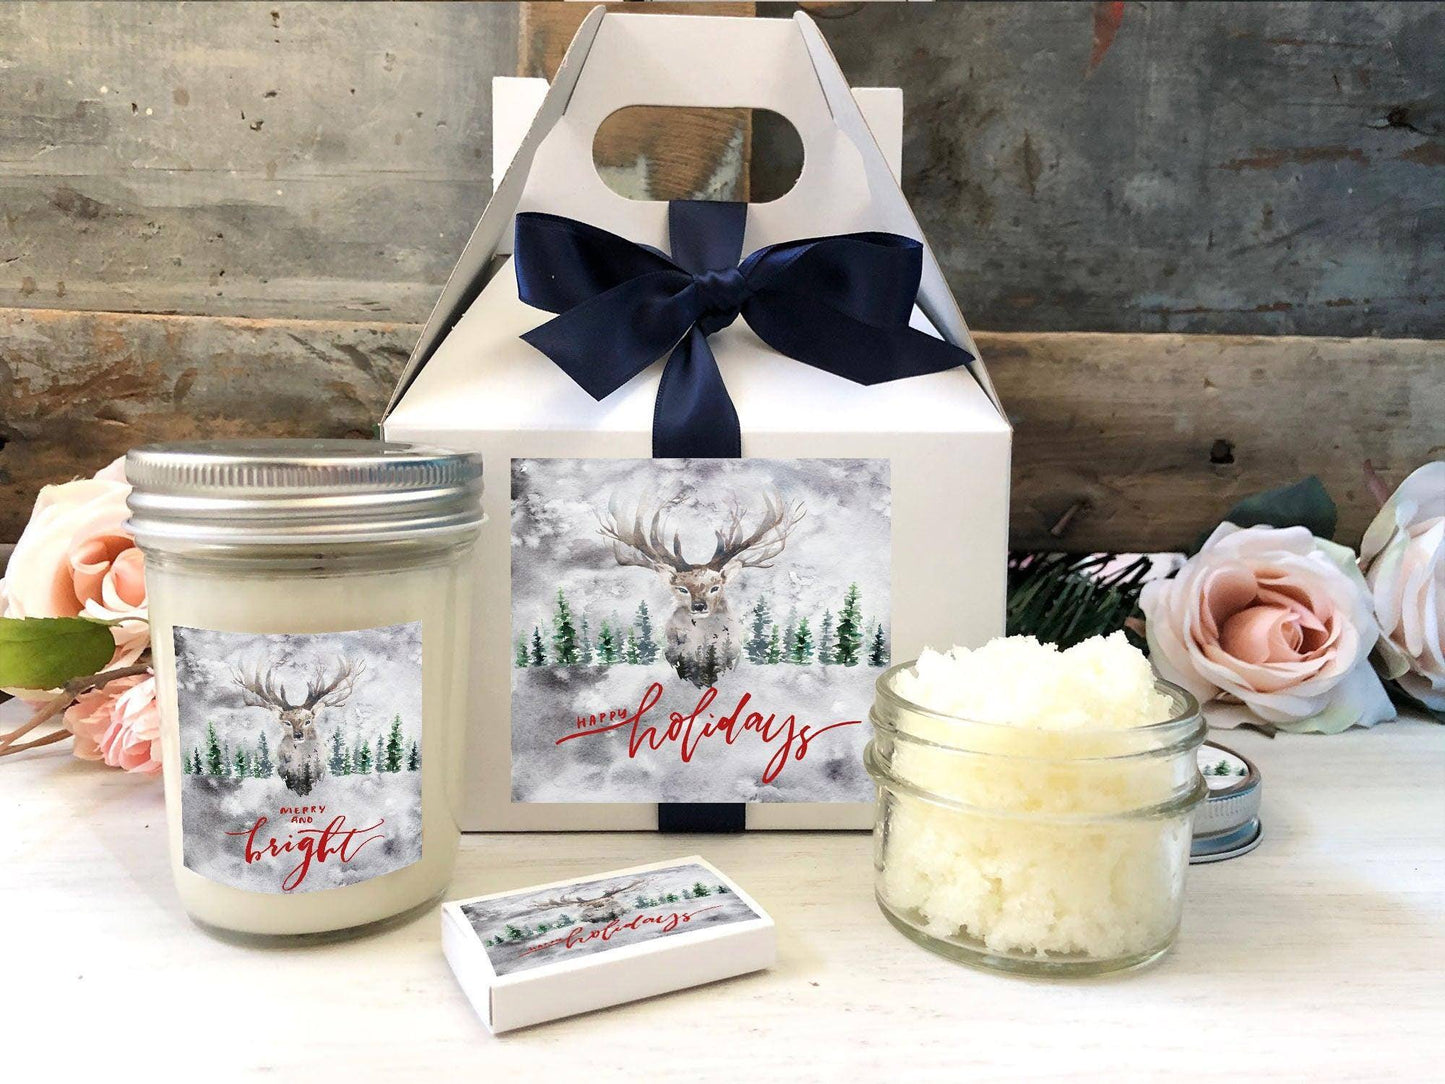 Christmas Spa Gifts for Women - Christmas Gift Ideas, Christmas Candles  Gift, Christmas Gift Baskets for Women, Mom, Sister, Wife, Friend with  Candle